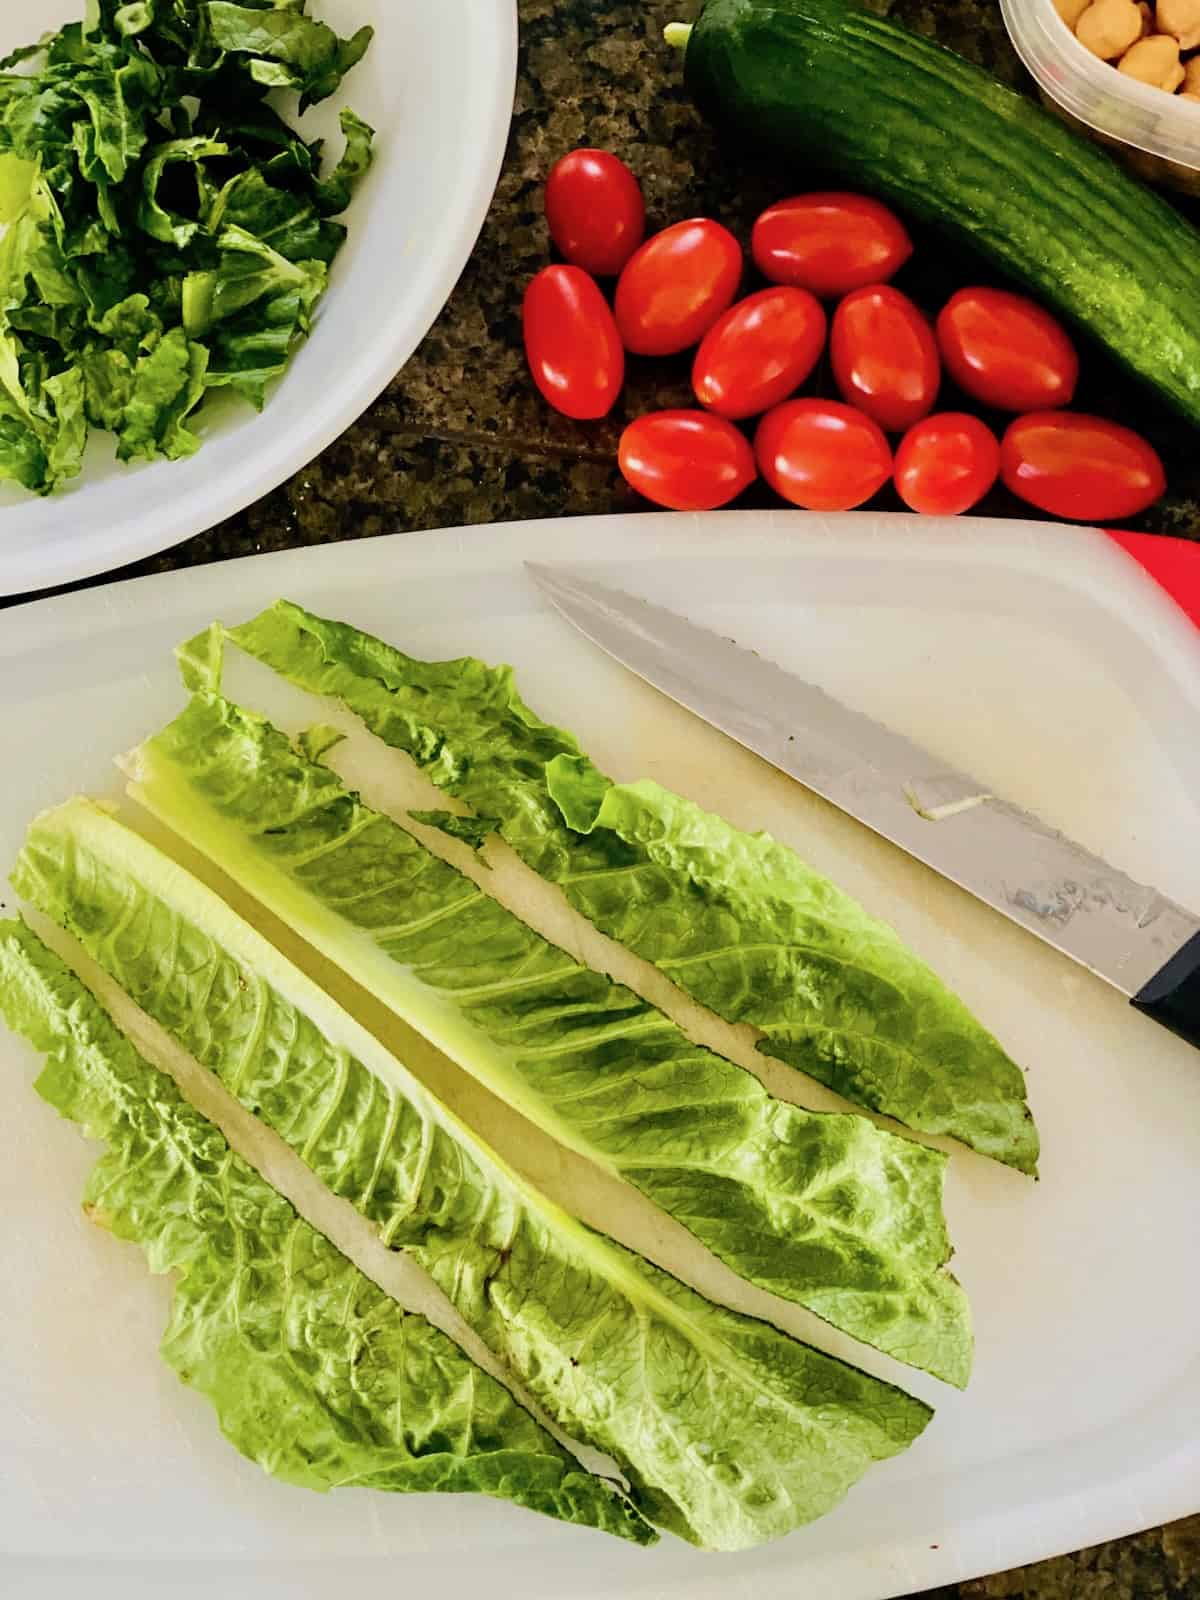 Cutting board with romaine leaves sliced into strips ready to chop